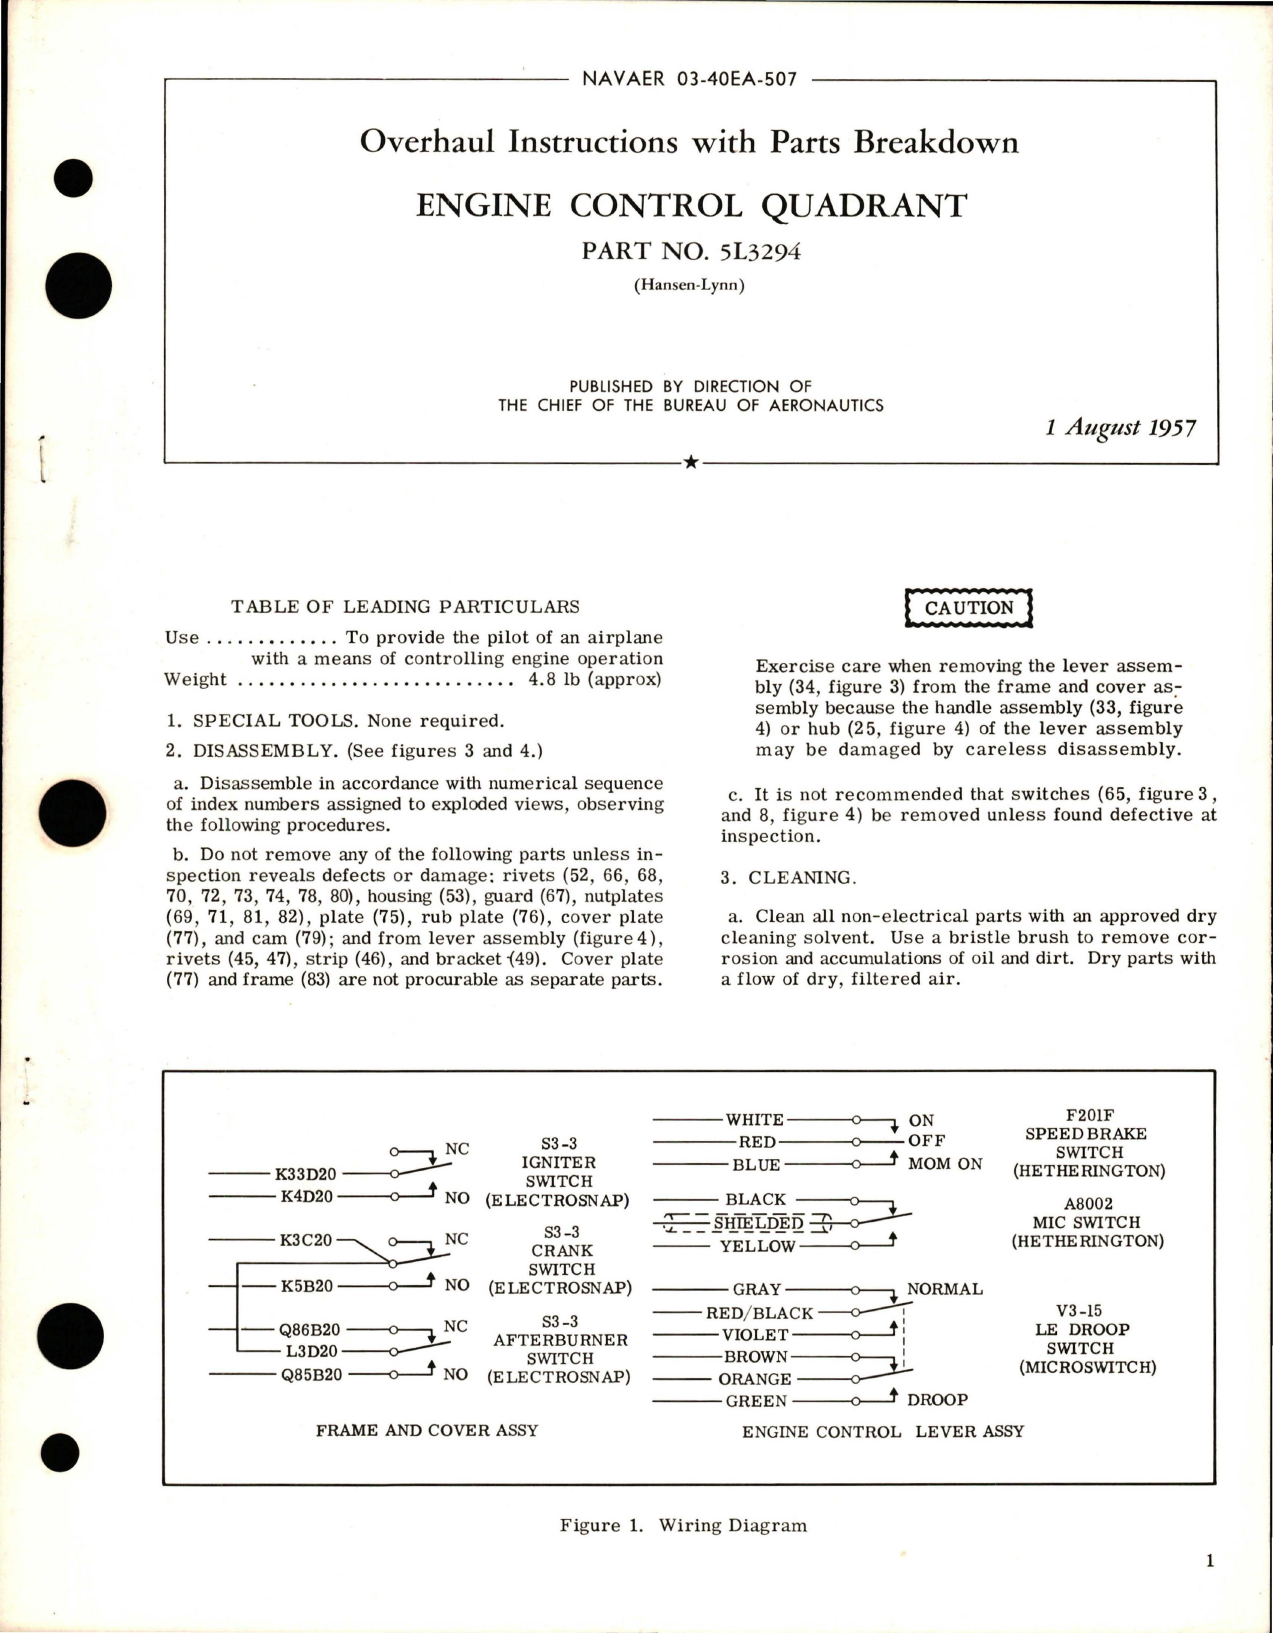 Sample page 1 from AirCorps Library document: Overhaul Instructions with Parts Breakdown for Engine Control Quadrant - Part 5L3294 